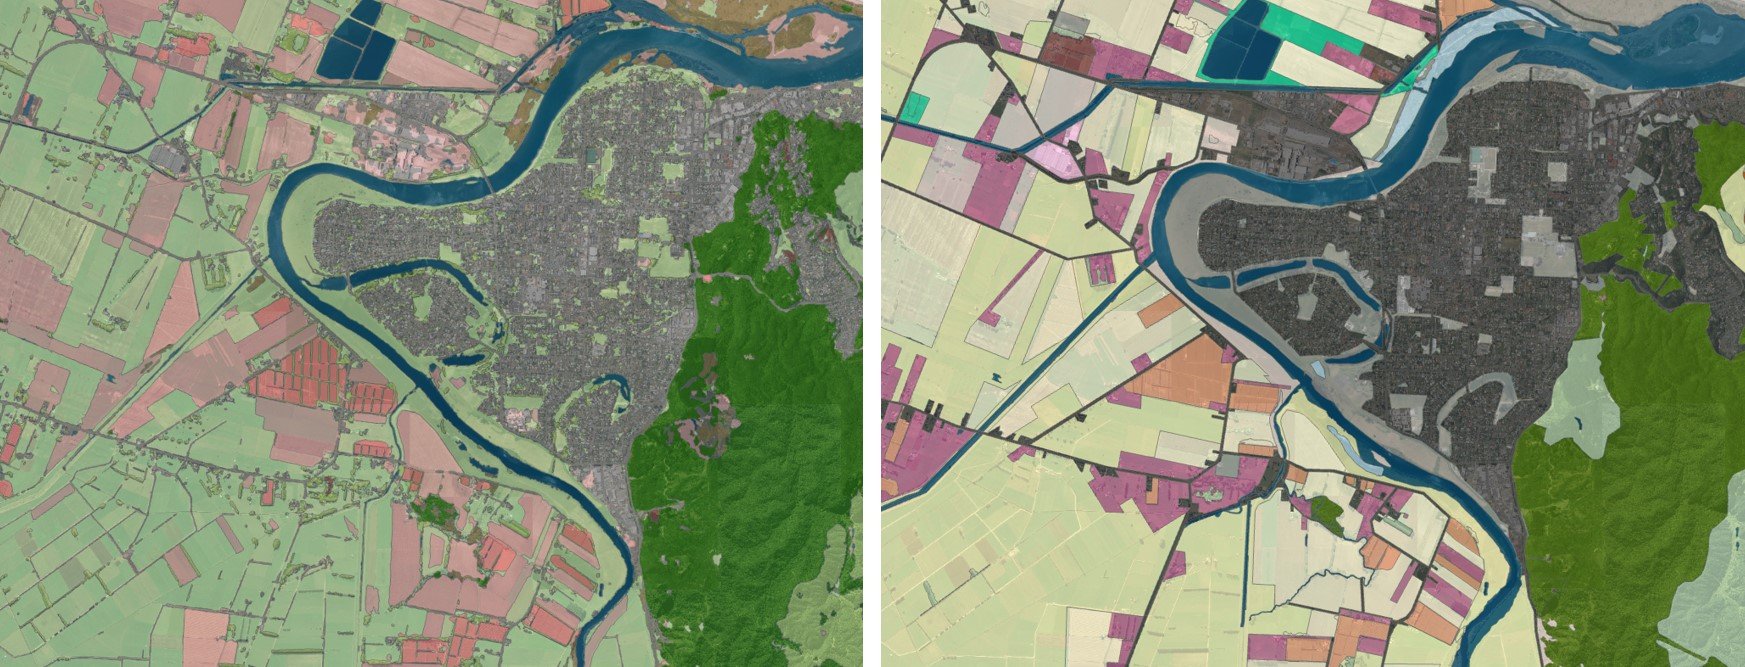 Map Land Use from Imagery